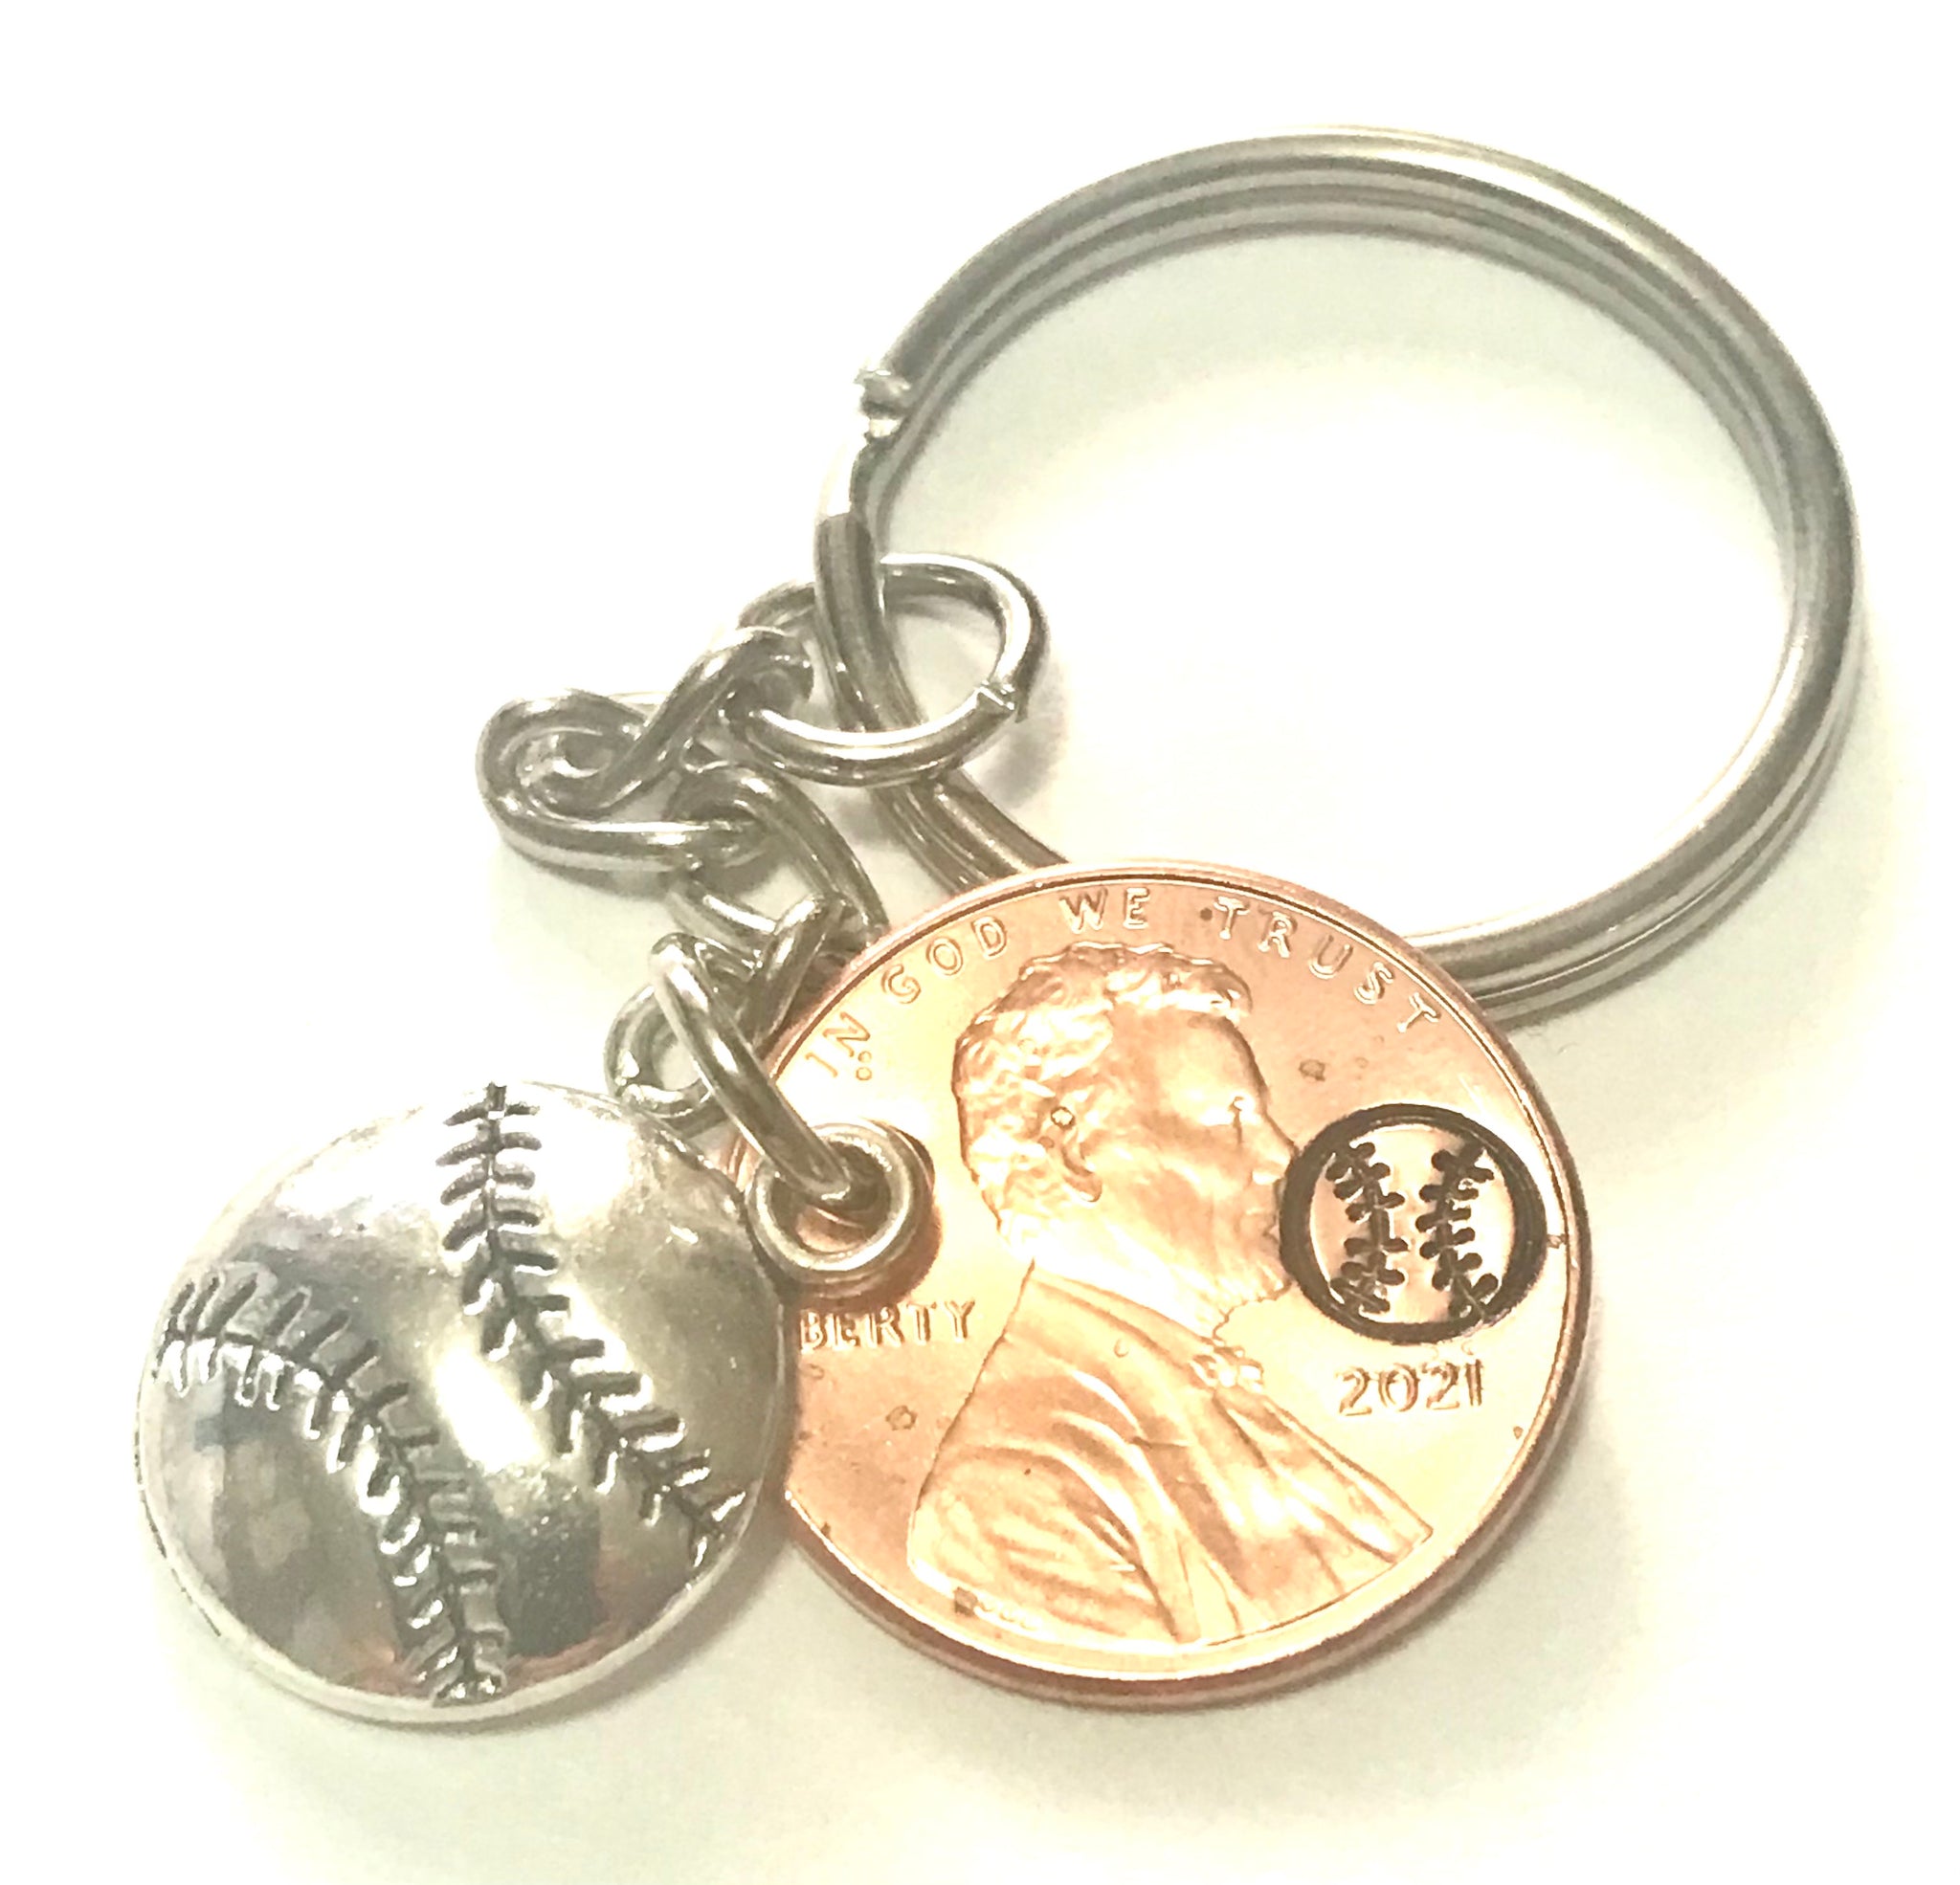 Silver Baseball Charm on a Lucky Penny Keychain with a hand stamped, engraved baseball design above the date.